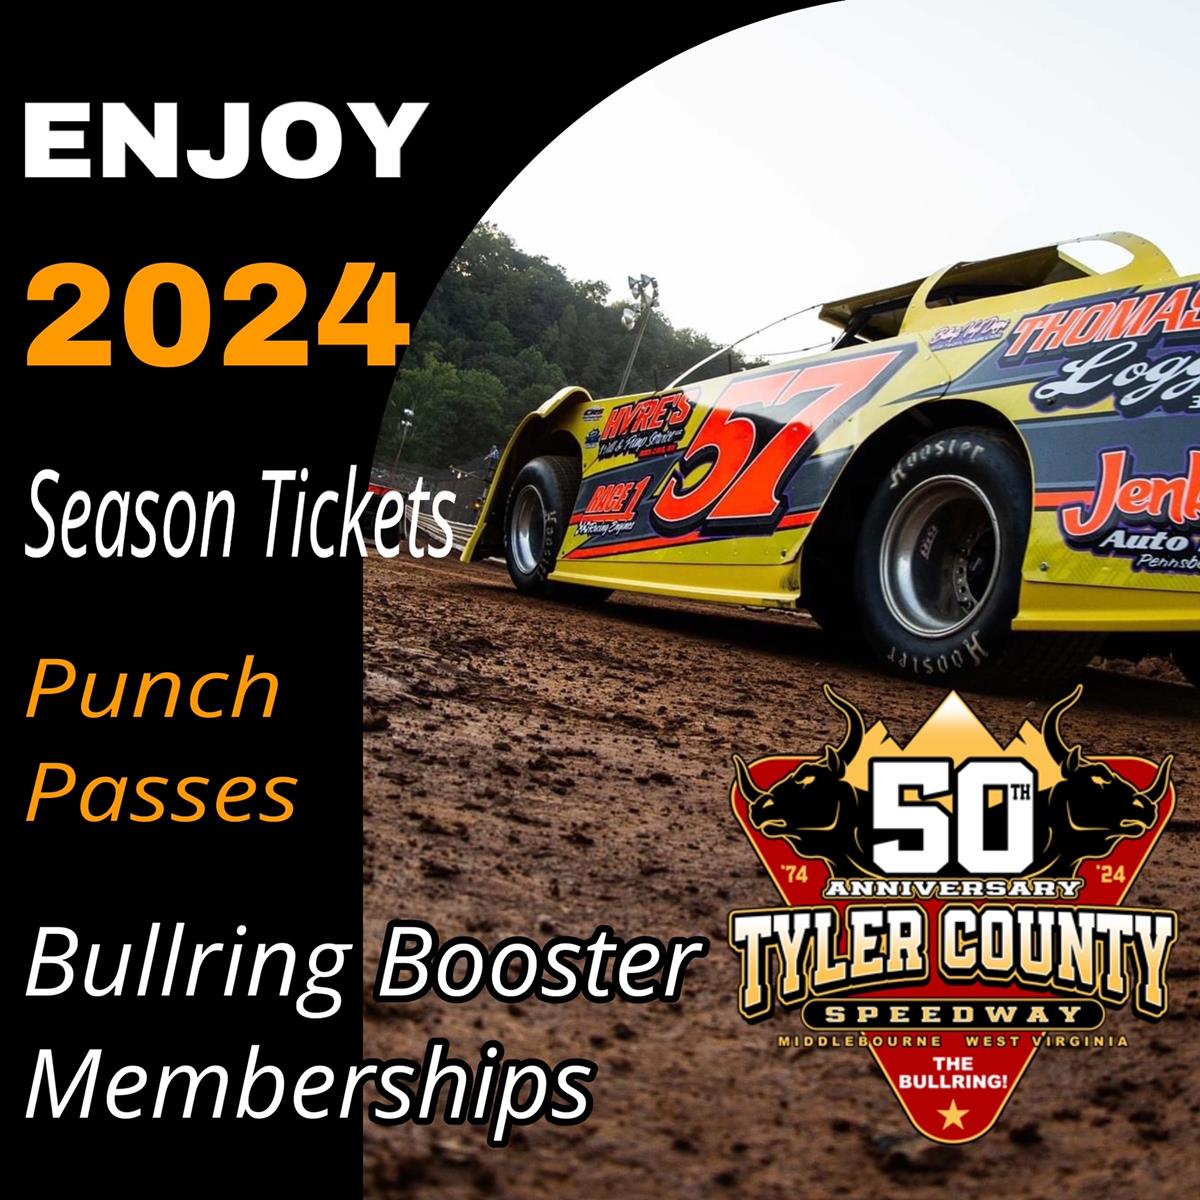 Accelerate into Savings with &#39;Fast Family Fun&#39; Season Ticket Plans at America&#39;s Baddest Bullring!